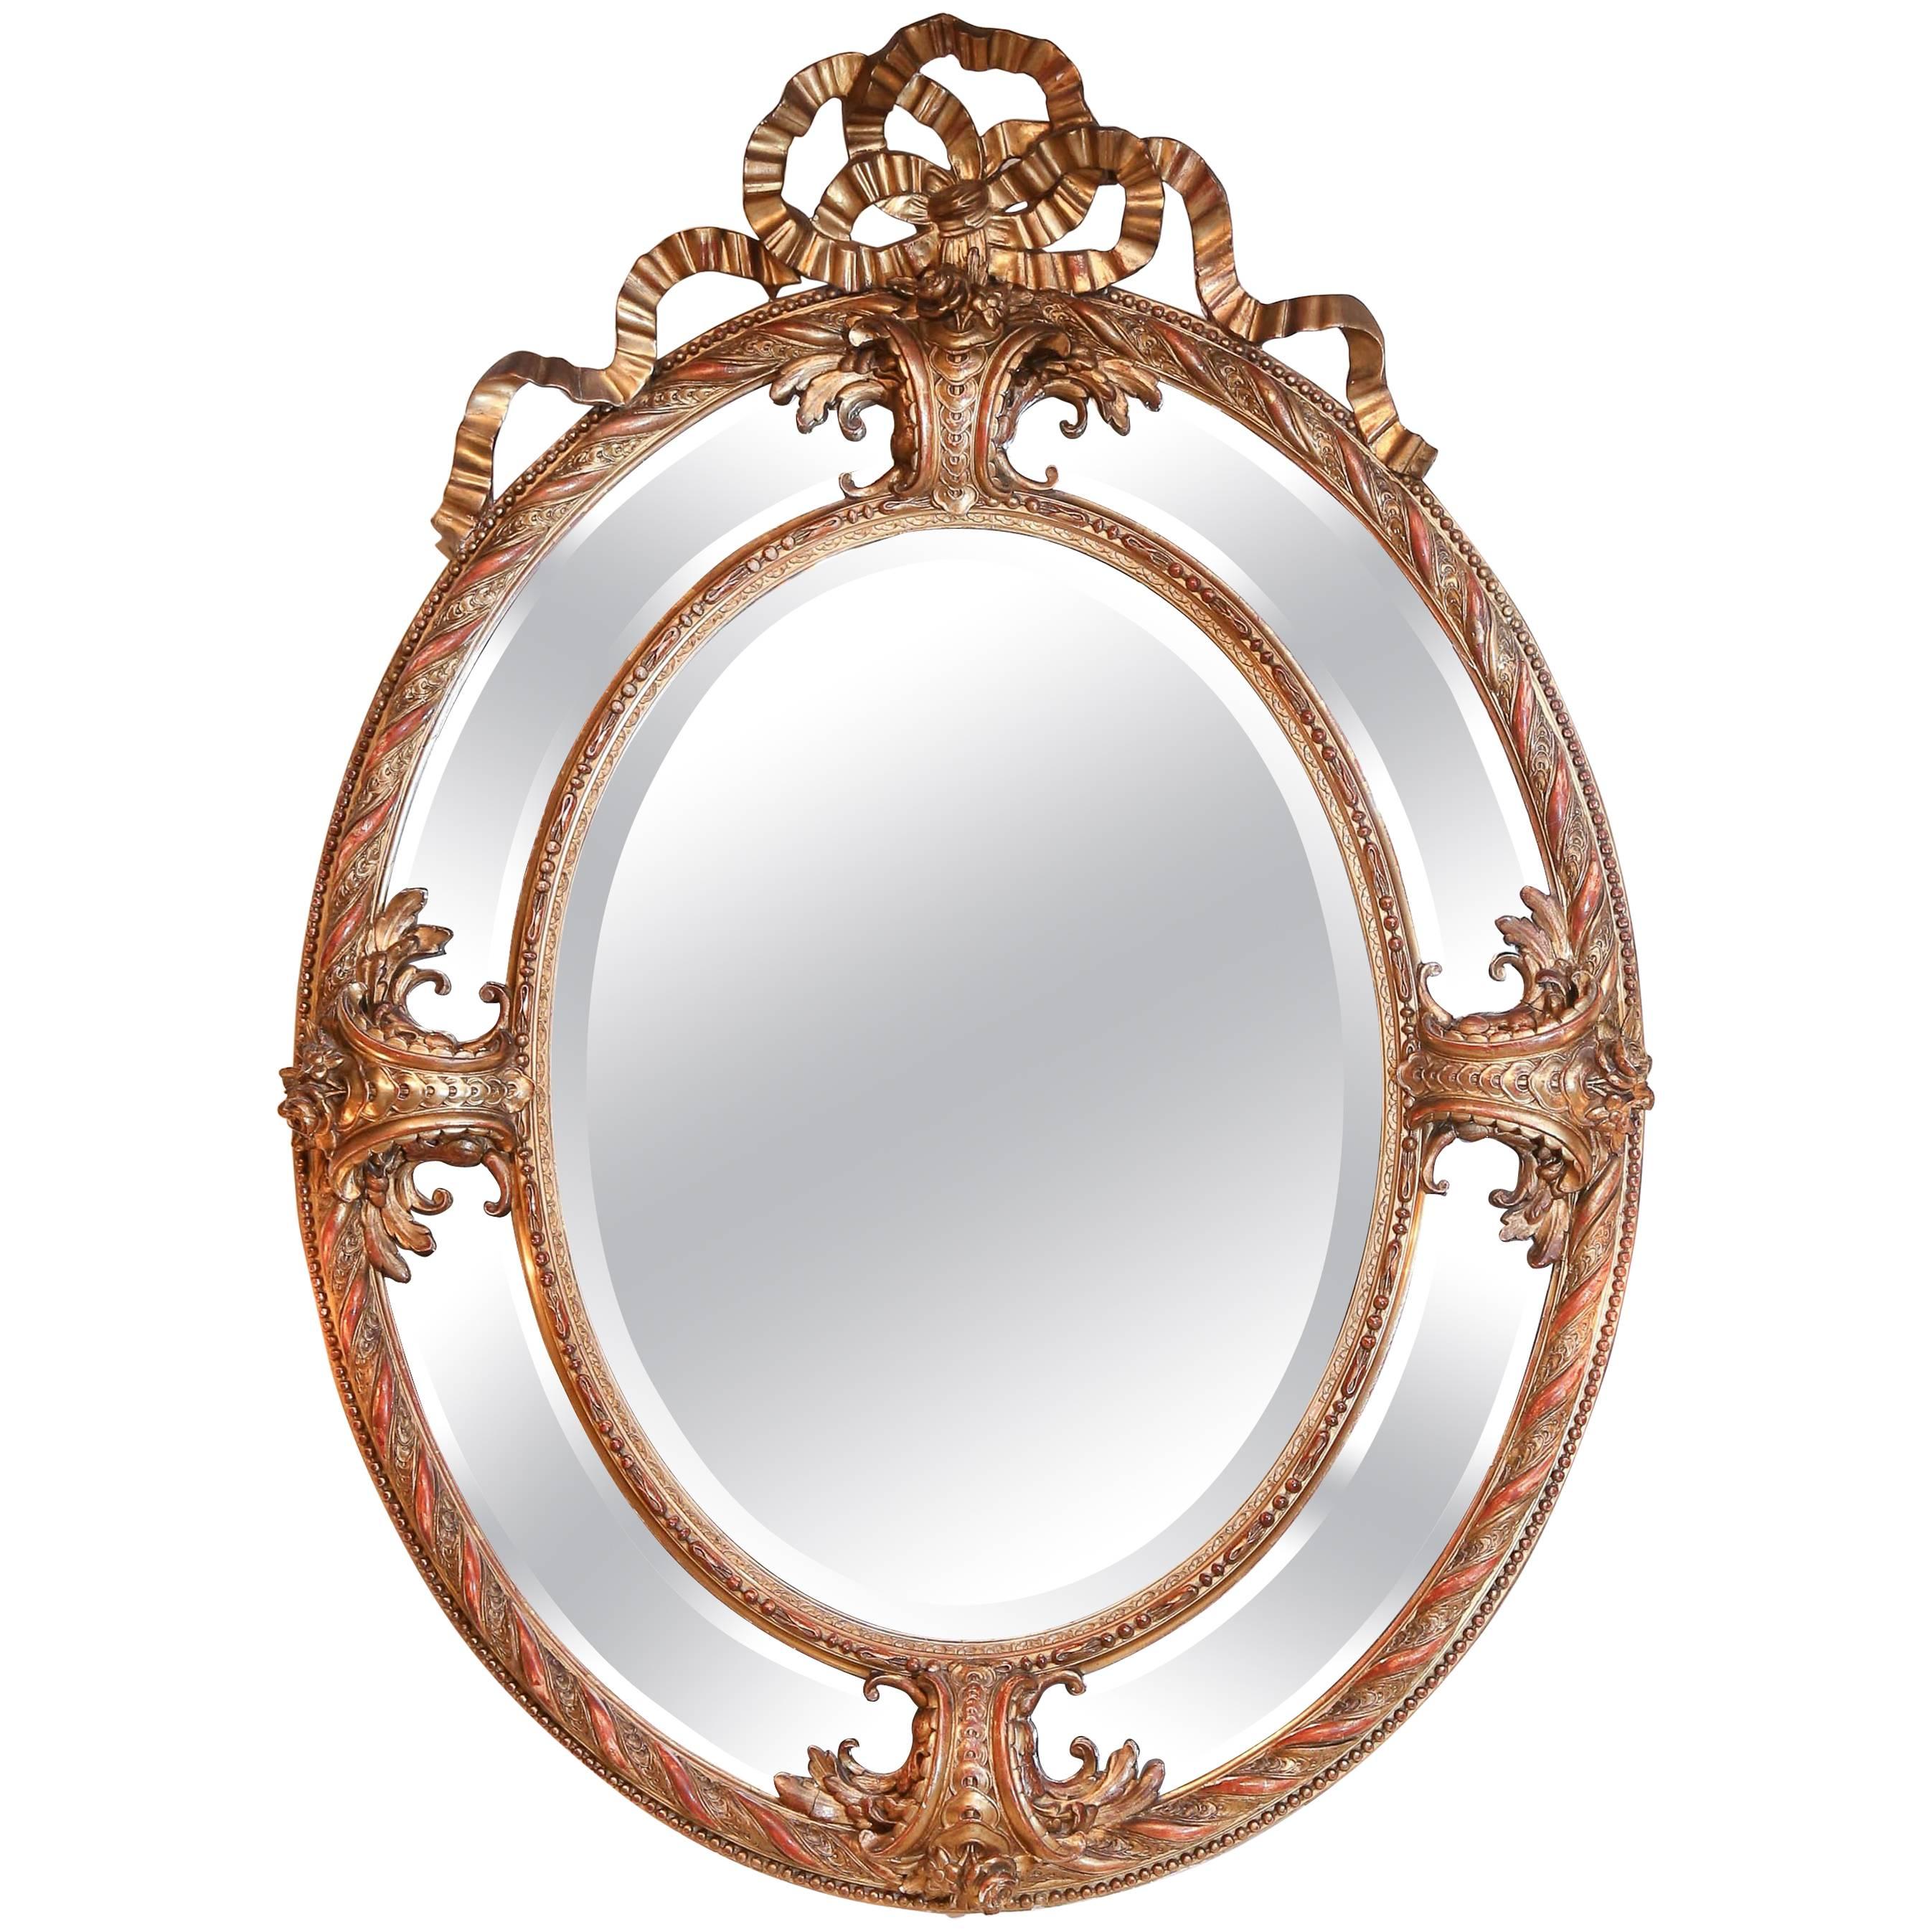 Large French Oval Cushion Mirror in Giltwood, 19th Century With Beveled Mirrors